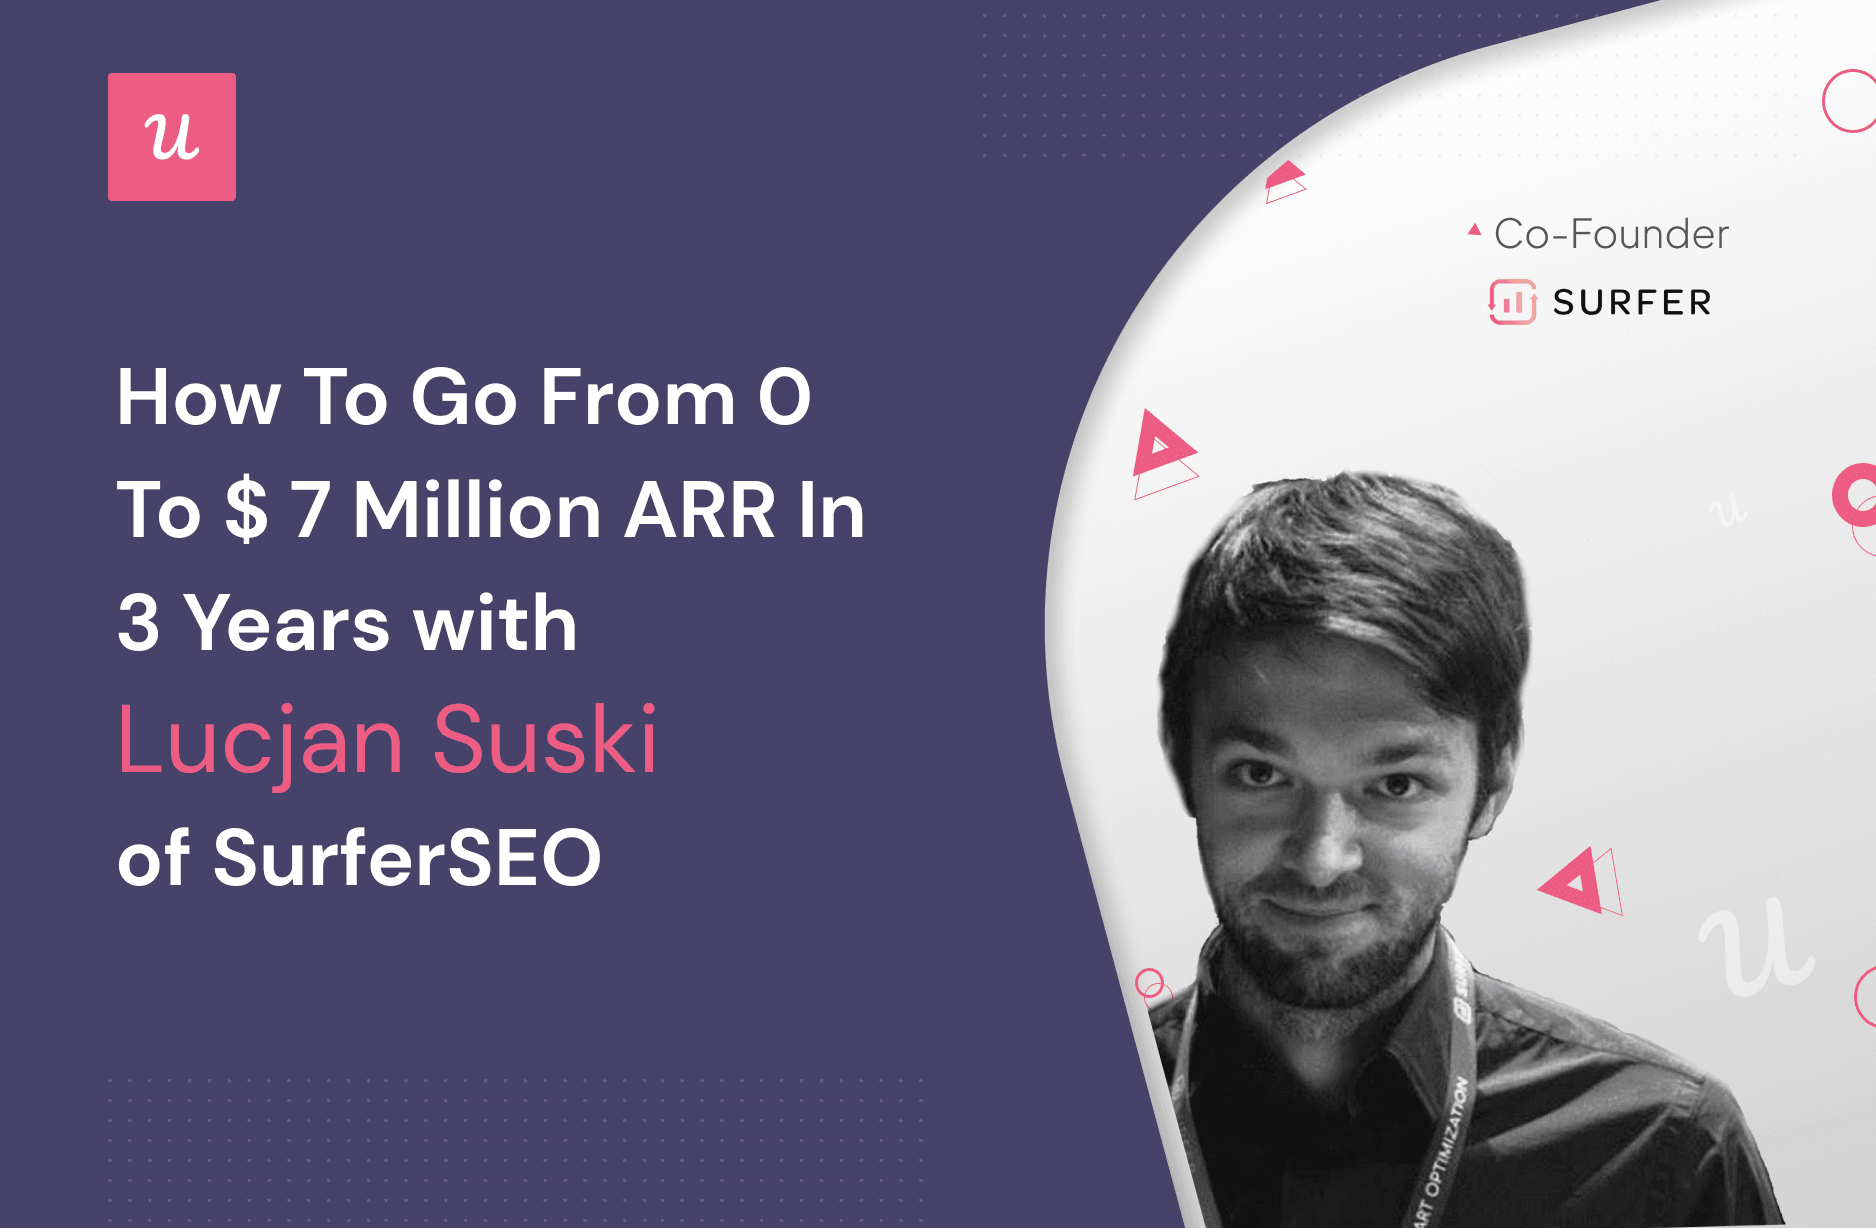 How To Go From 0 to $ 7 Million ARR In 3 Years With Lucjan Suski Of SurferSEO